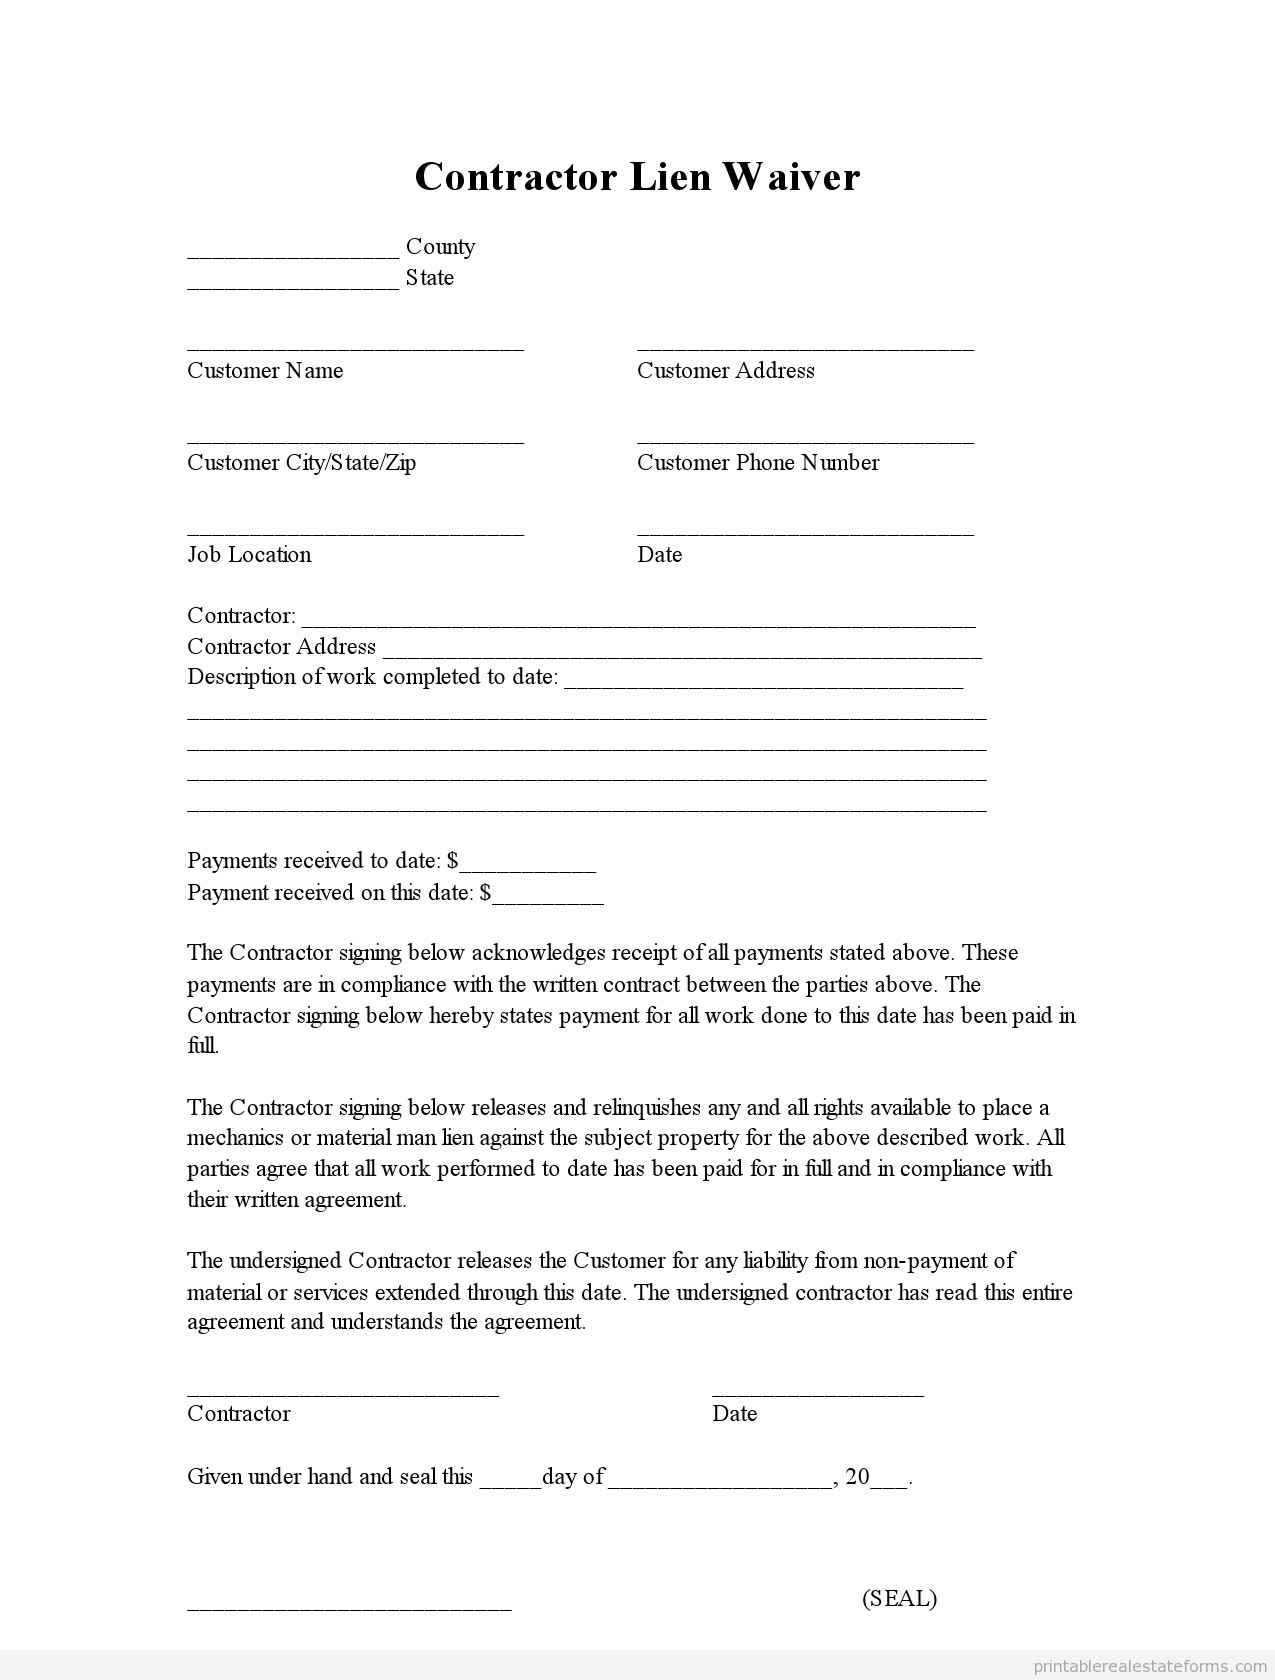 Sample Printable contractor lien waiver Form